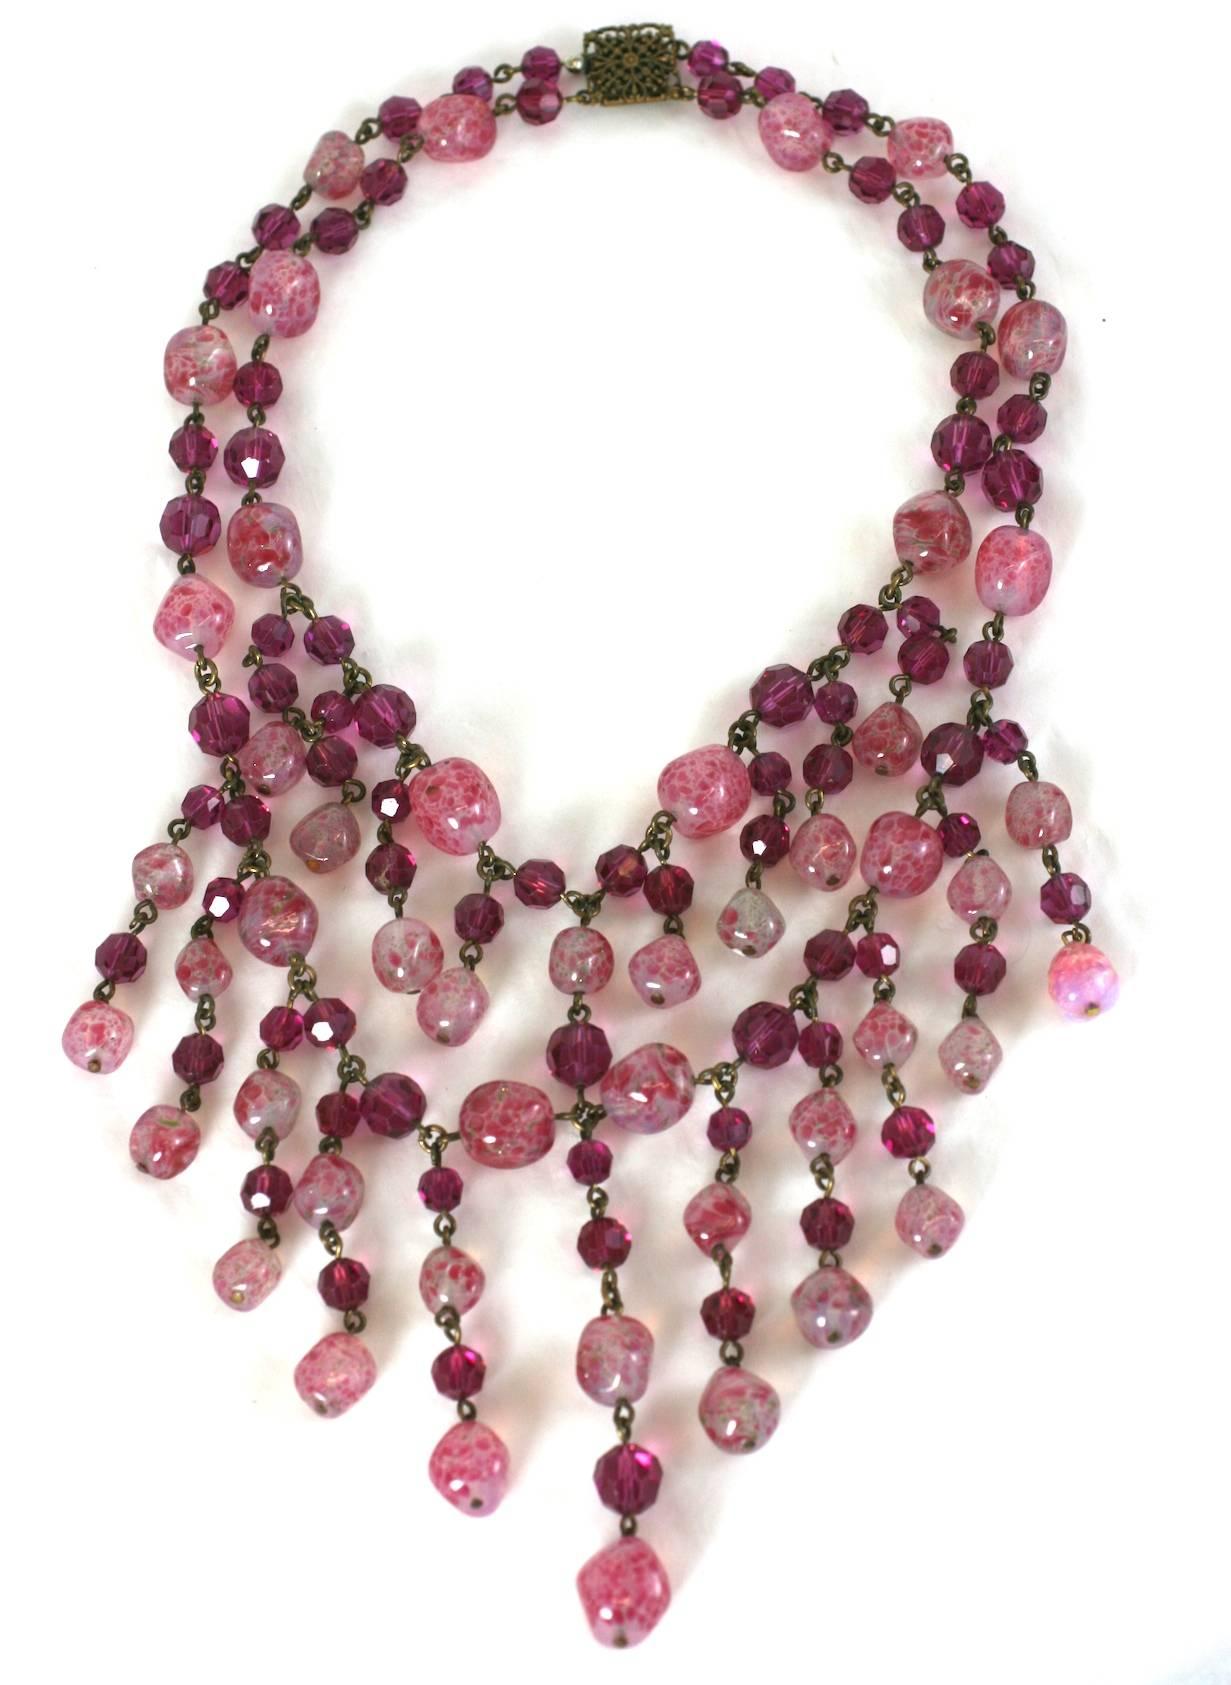 Elegant Louis Rousselet draped bib necklace of faceted fuschia crystal beads, mixed with handmade mottled rose quartz pate de verre beads. Made in France. France 1950's. Excellent Condition
Length 16.50